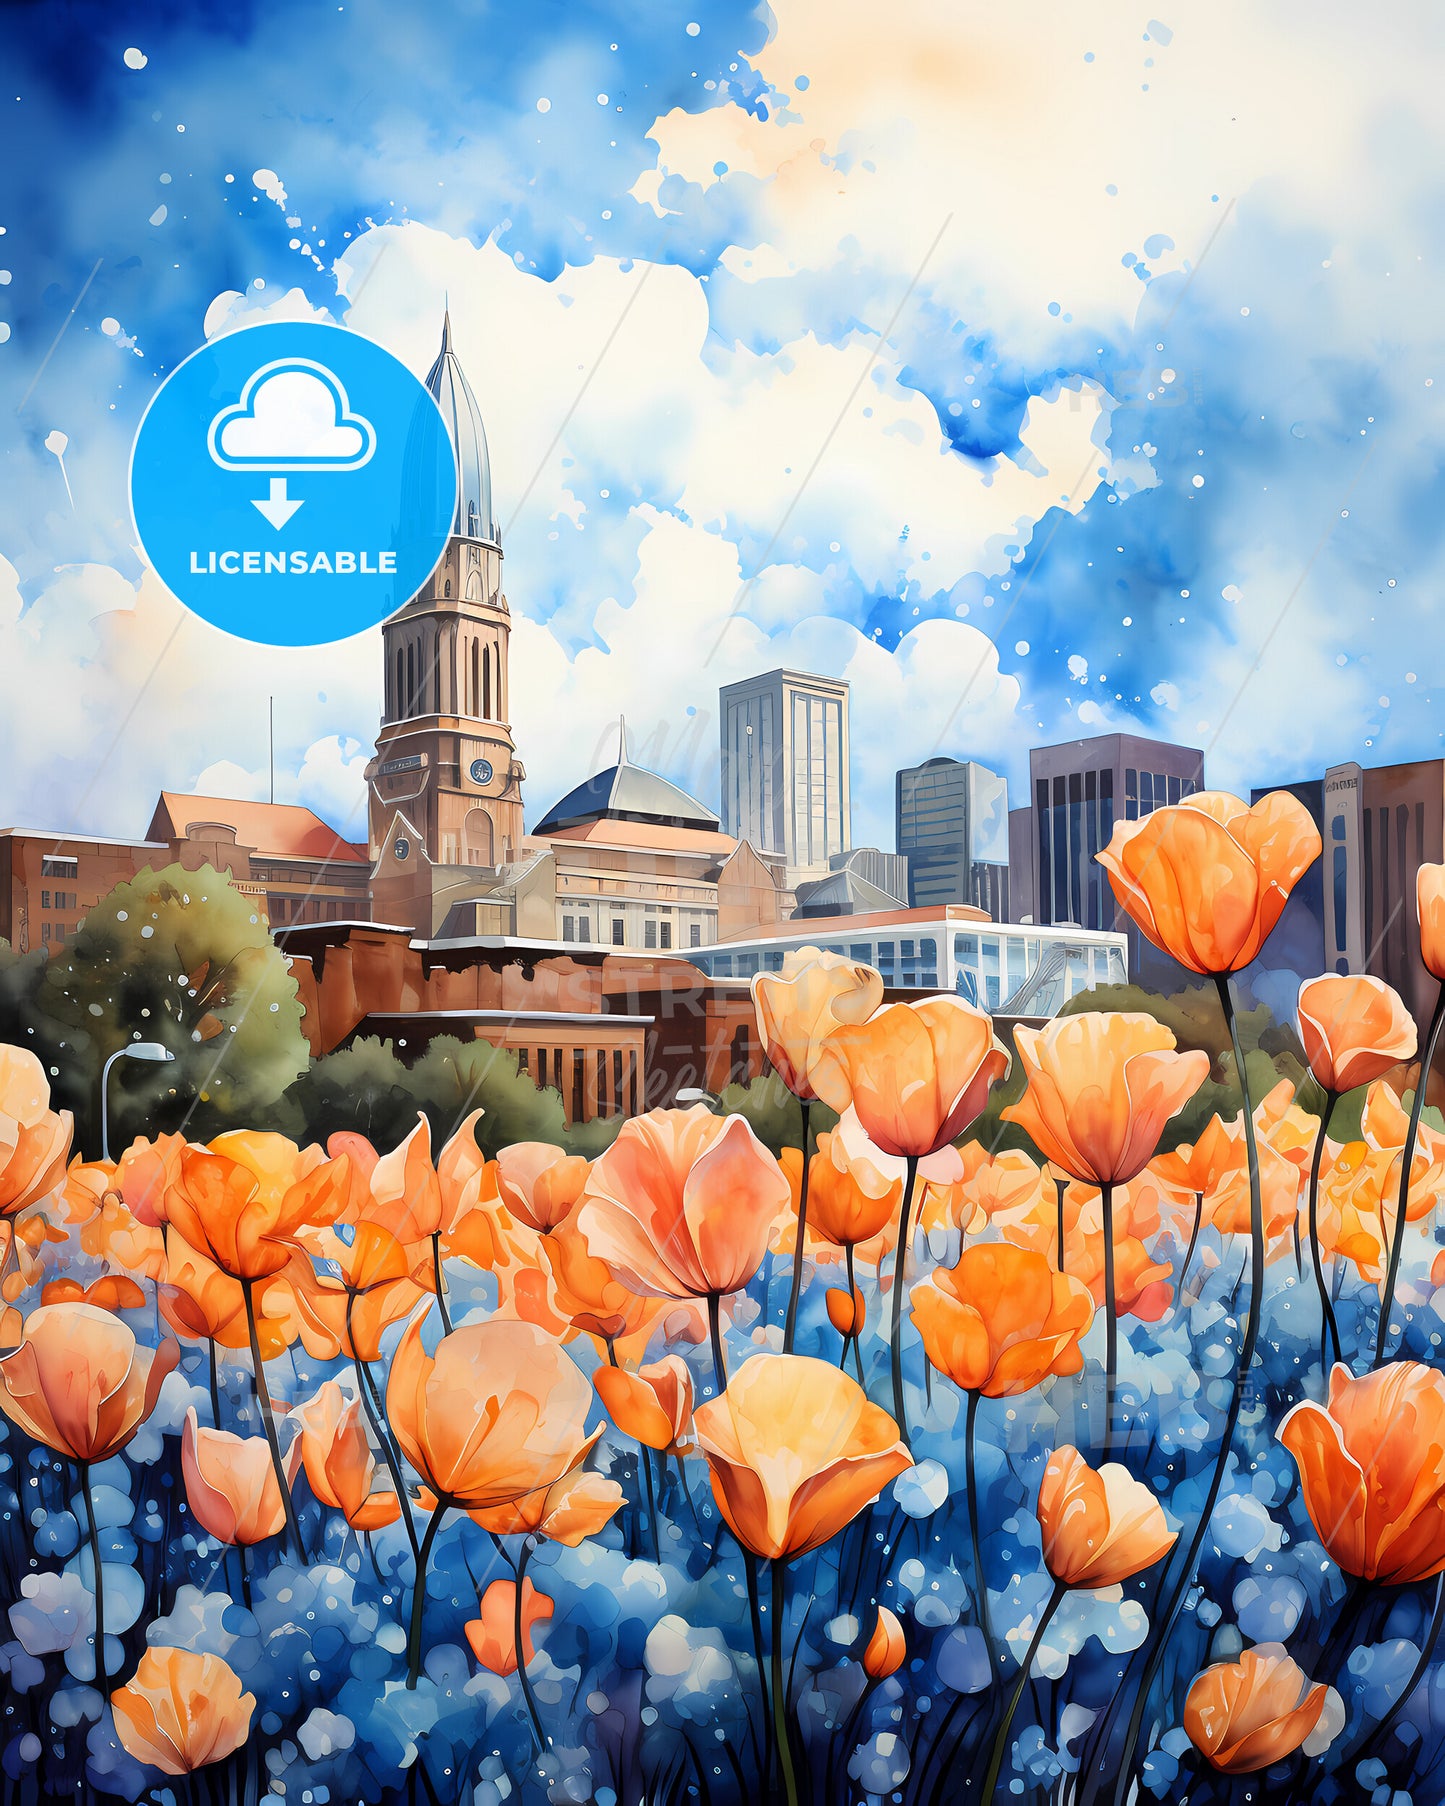 Gastonia, North Carolina, a painting of orange flowers in front of a city